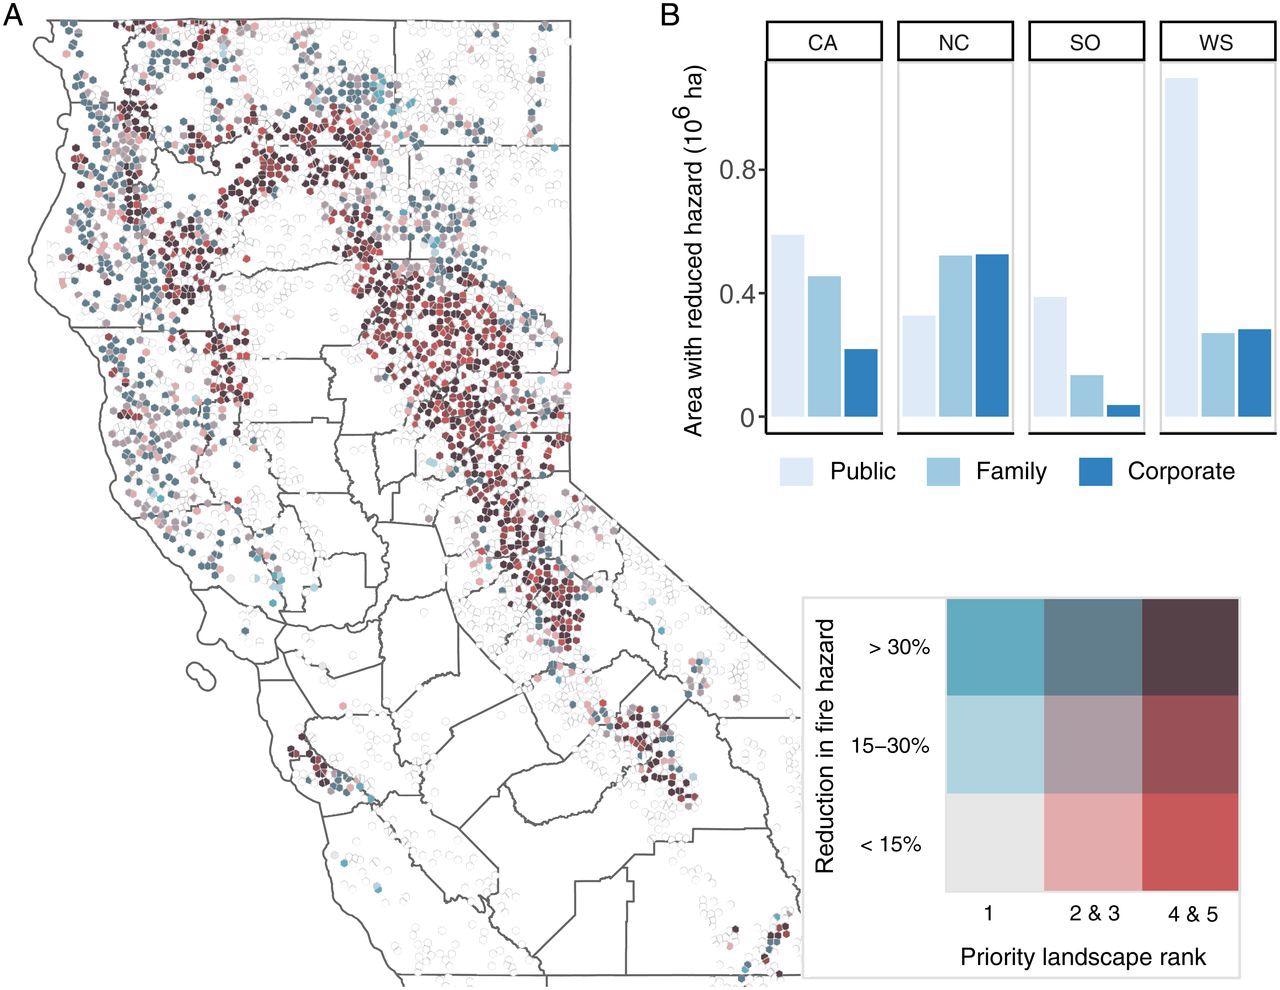 Fire hazard reduction in the IWP scenario in (A) CalFire Fire Priority Zones and (B) summed across the study area. Reduction in fire hazard is defined as the difference in basal area mortality fraction with and without treatment in the event of a wildfire with severe fire weather. In B, each hexagon represents a single FIA plot, which is statistically representative of a larger area of forest (usually ~2,000 to 2,500 ha). Empty hexagons represent untreated plots, and county boundaries are shown in the background. In B, values are grouped by FVS Variants, where CA is Central California, NC is North Coast, SO is Northeast California, and WS is Western Sierra. Colors represent ownership groups, in which “Family” is noncorporate private land